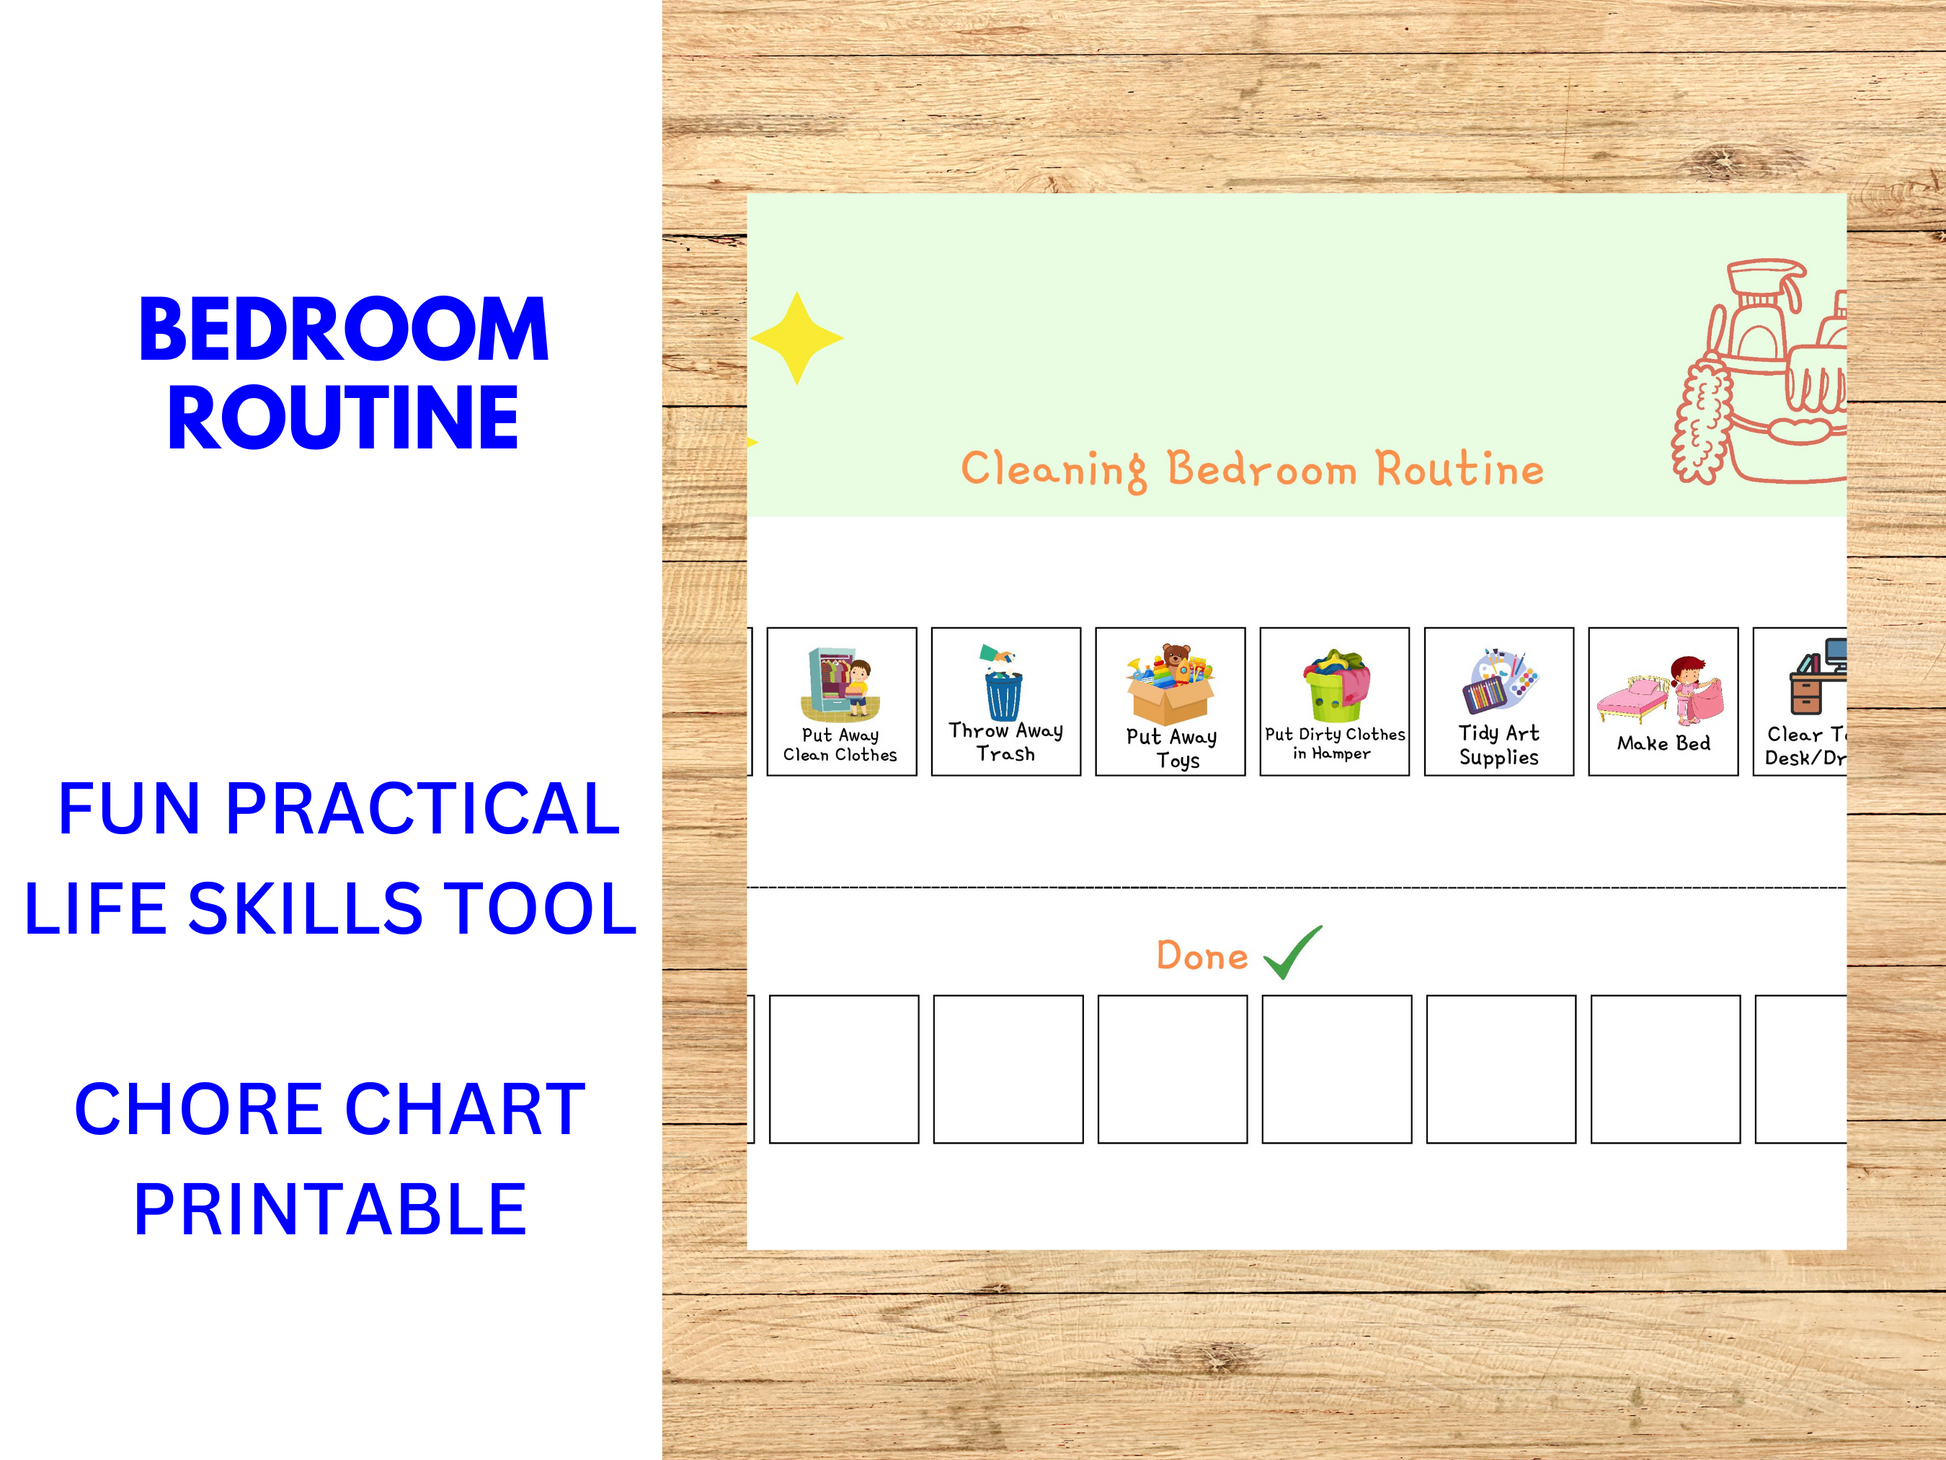 Showing cleaning bedroom chore chart.